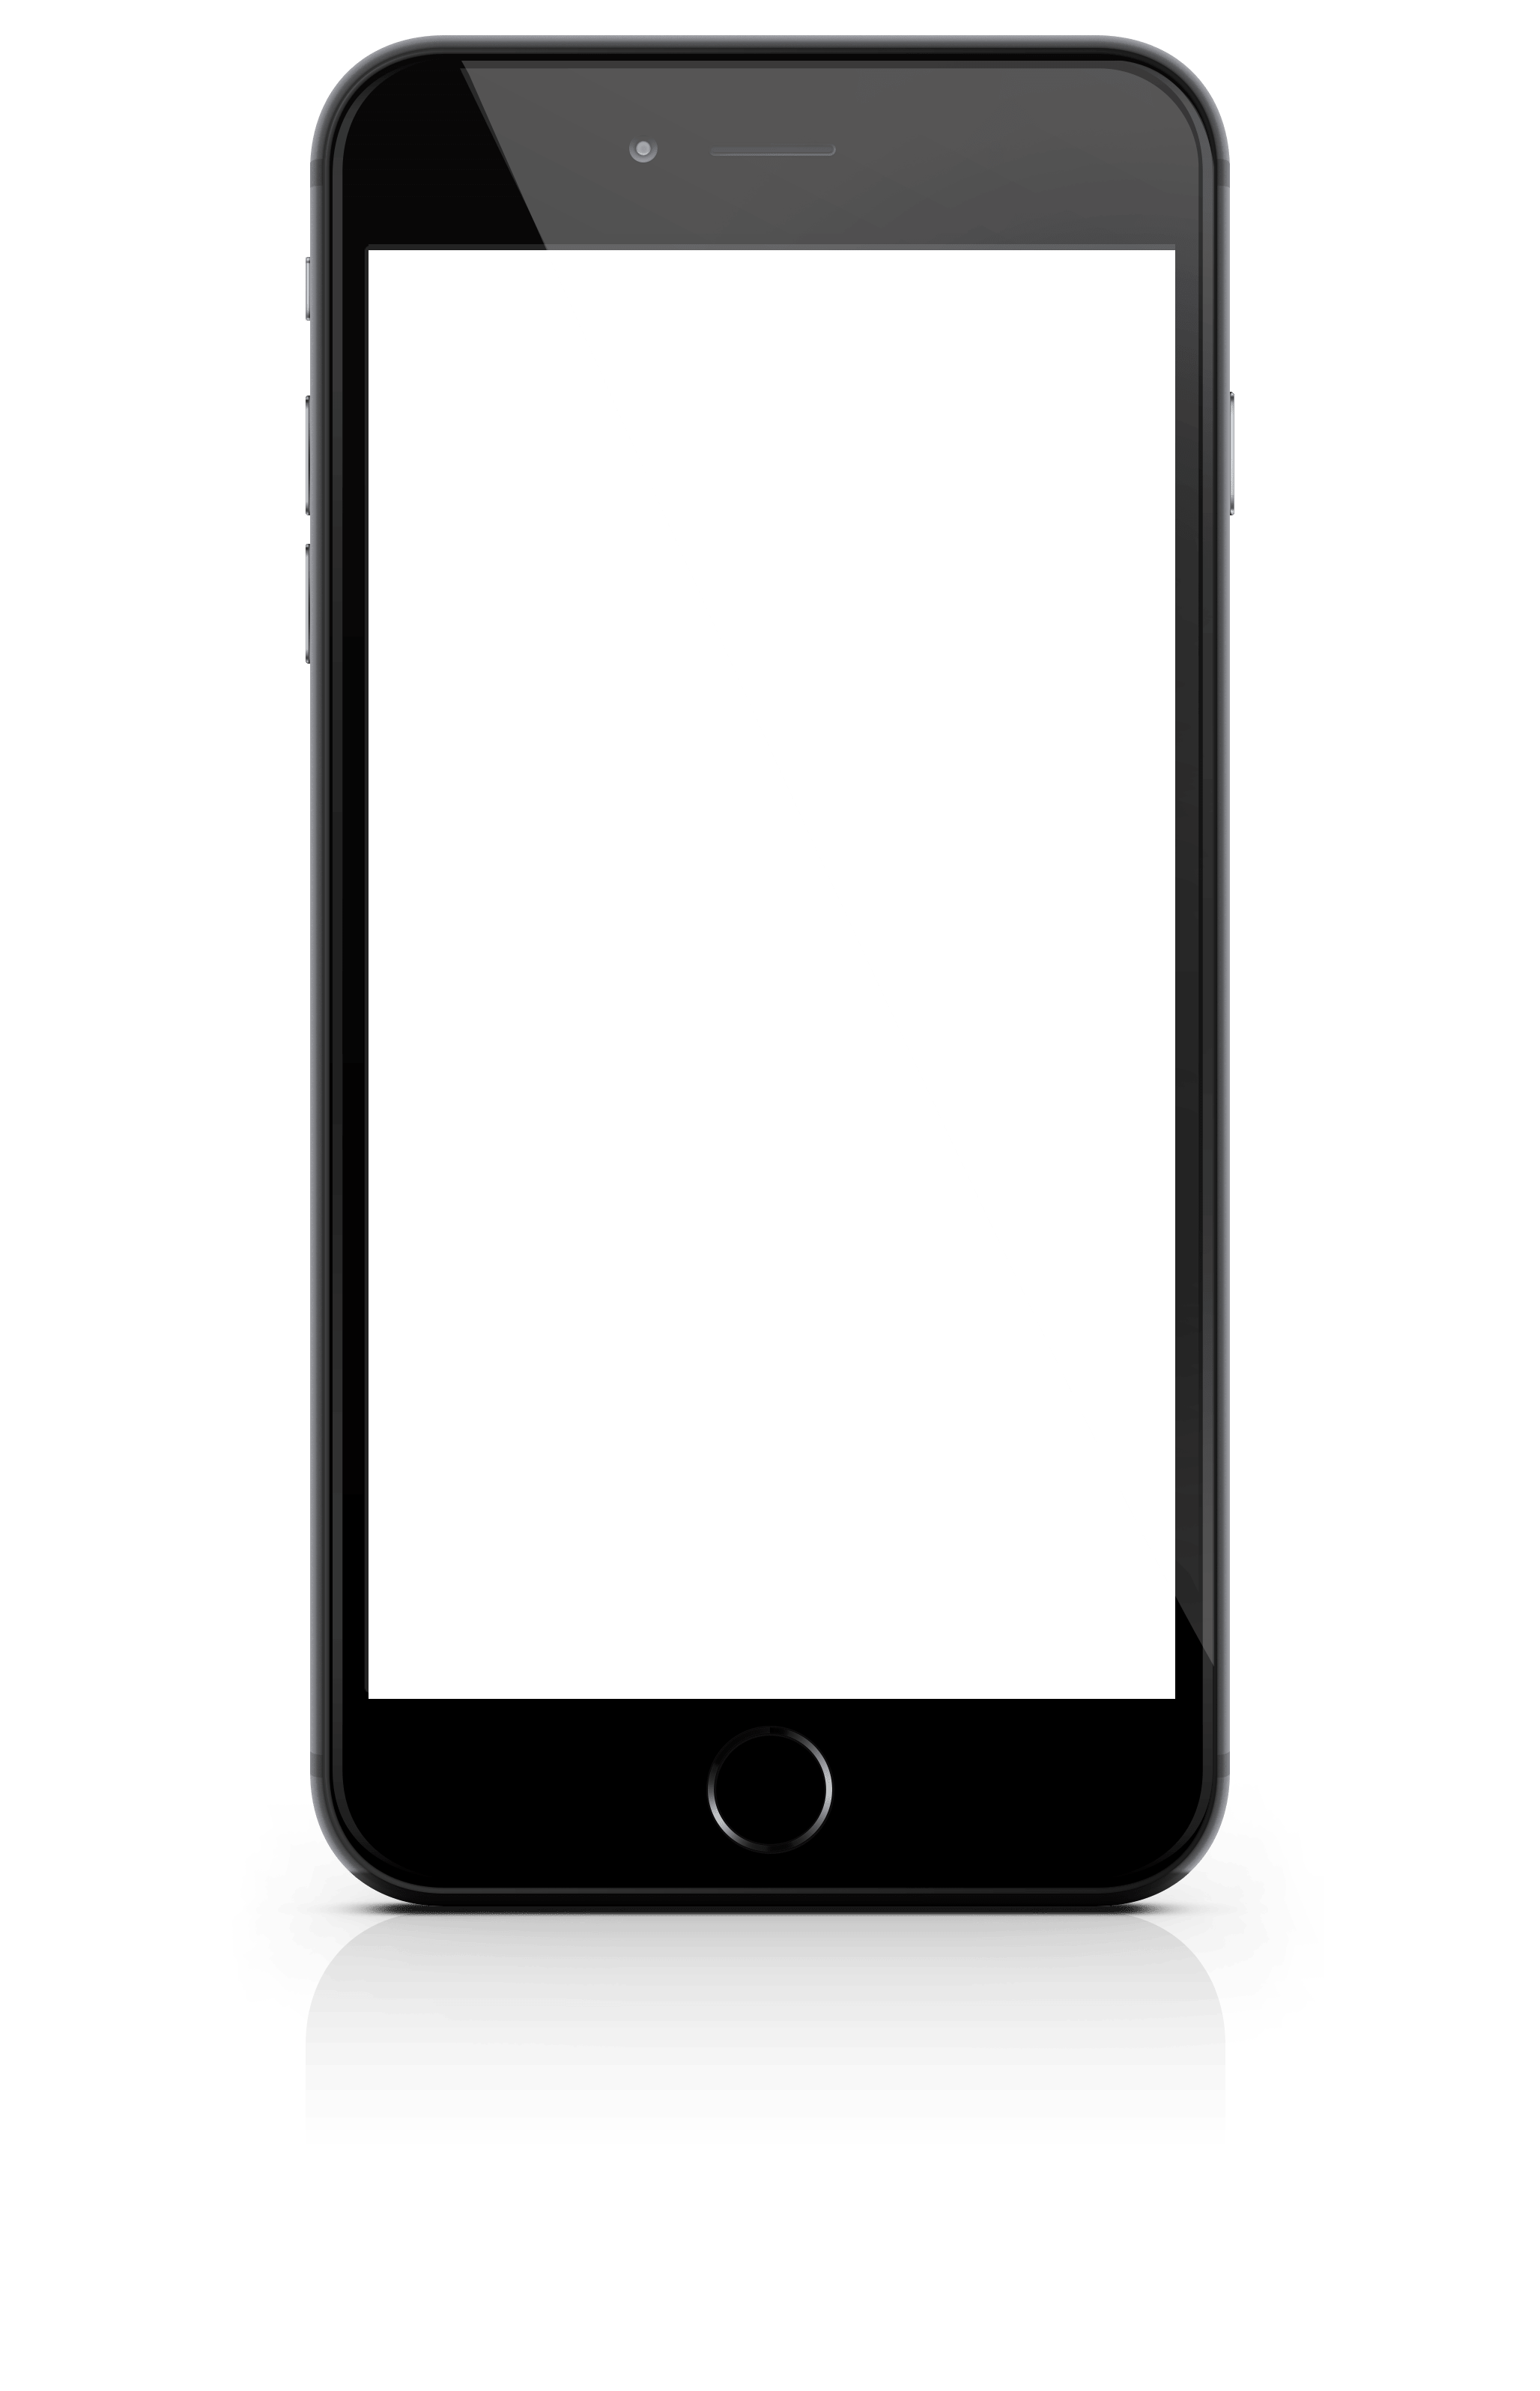 Smartphone frame for gif showing anti-racism training app